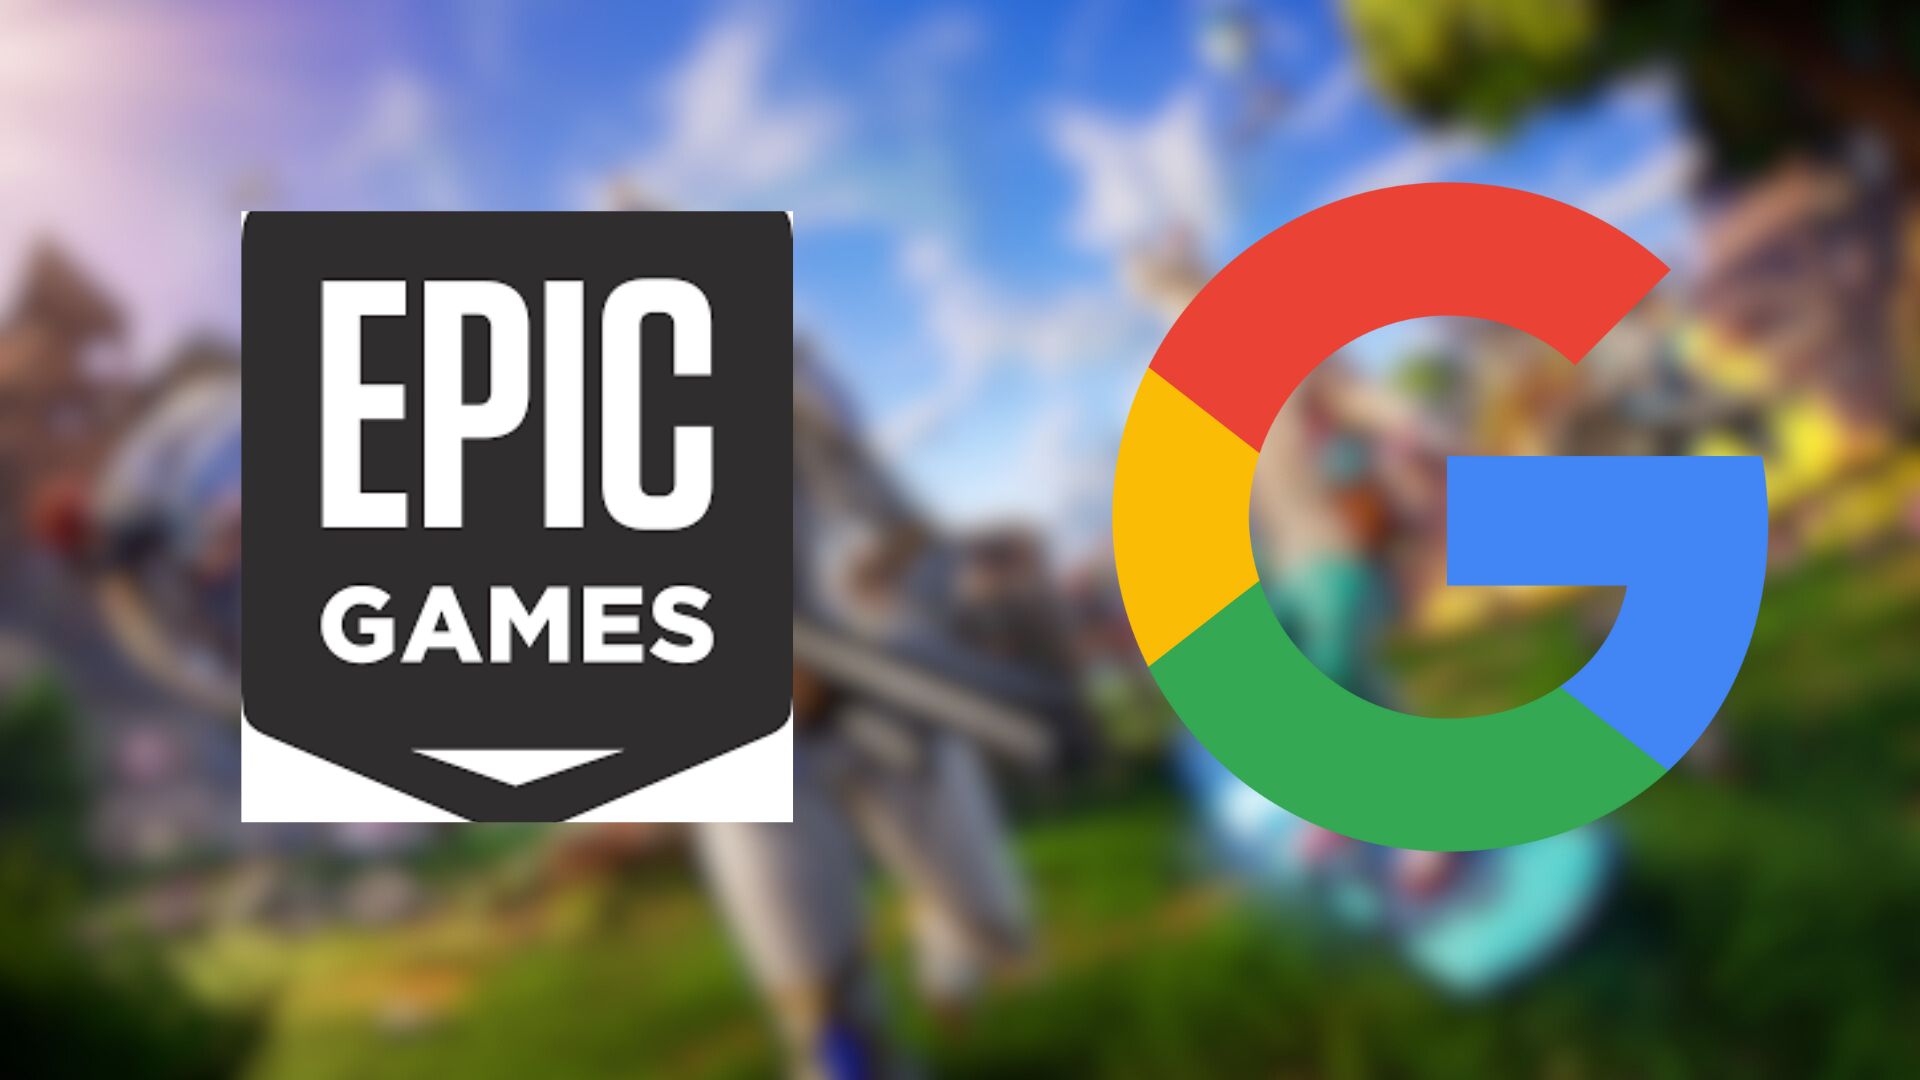 Google Tells Court That It Offered USD 147 Million to Epic Games To Launch  Fortnite on Google Play Store